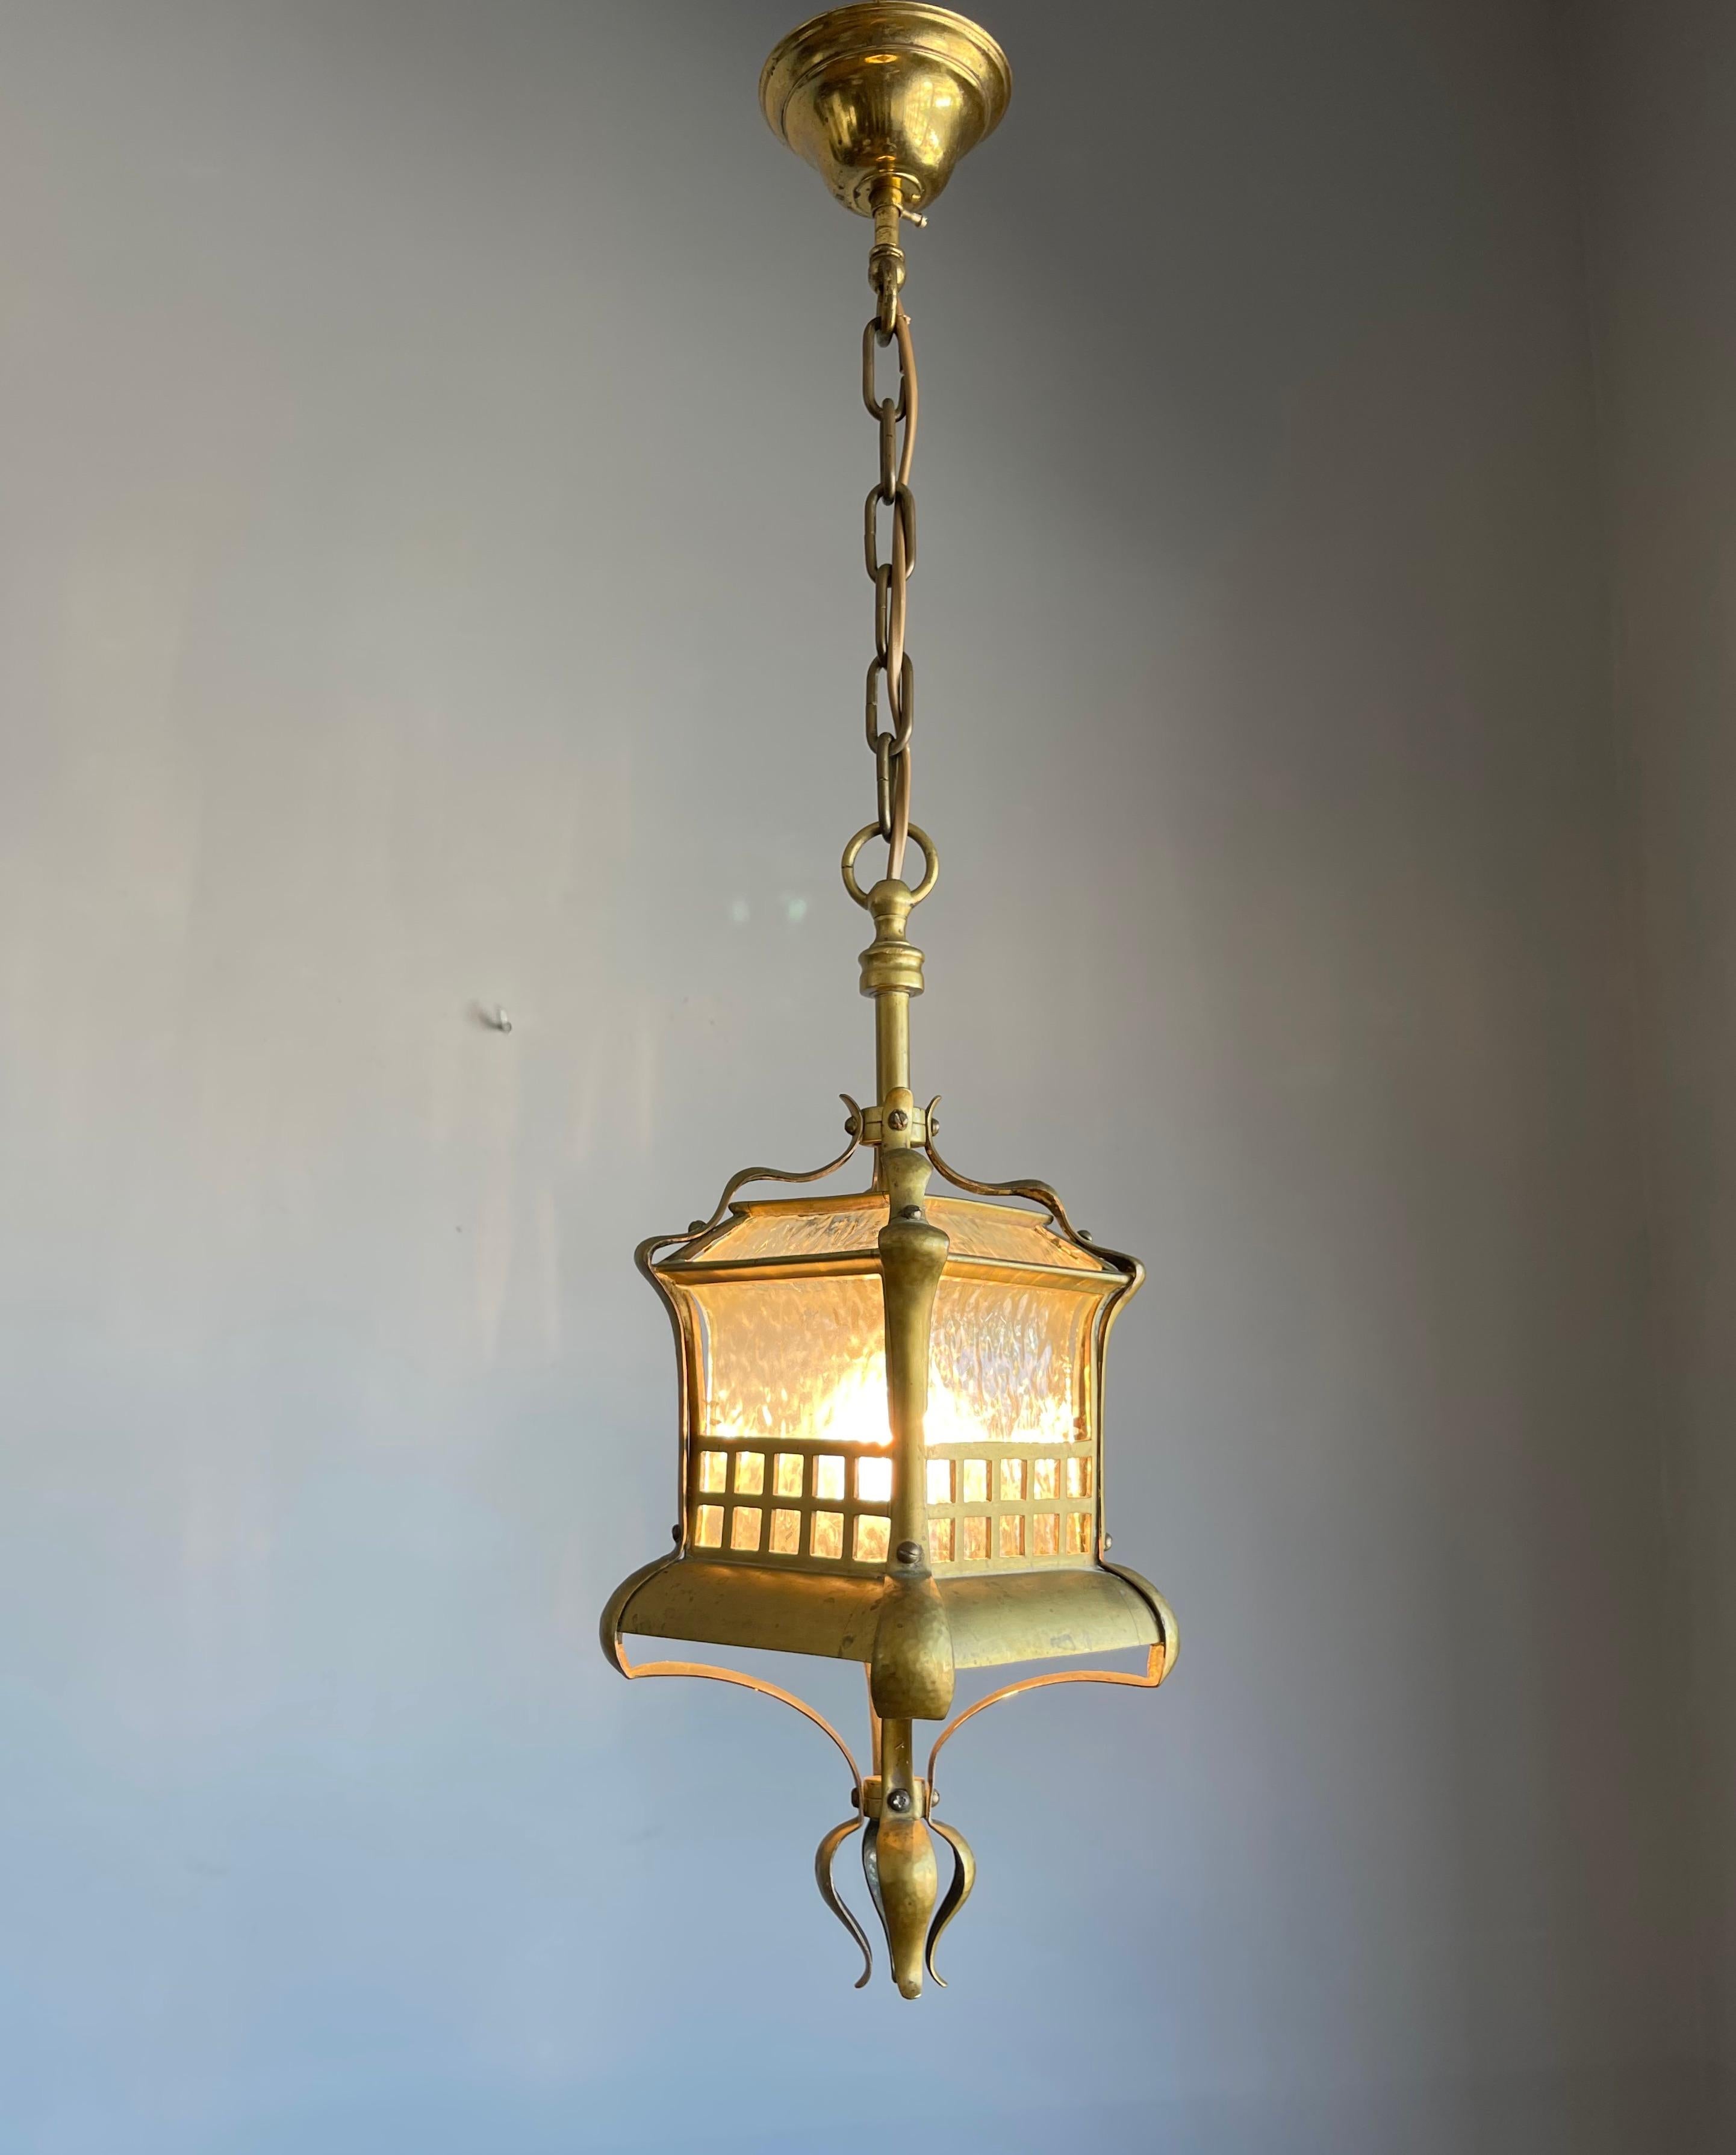 Marvelous design, Benson style, handmade Arts and Crafts era ceiling light.

This early Jugendstil pendant is of an aesthetically pleasing beauty that will never fail to impress. The design is as Jugendstil or Art Nouveau as they come, because you